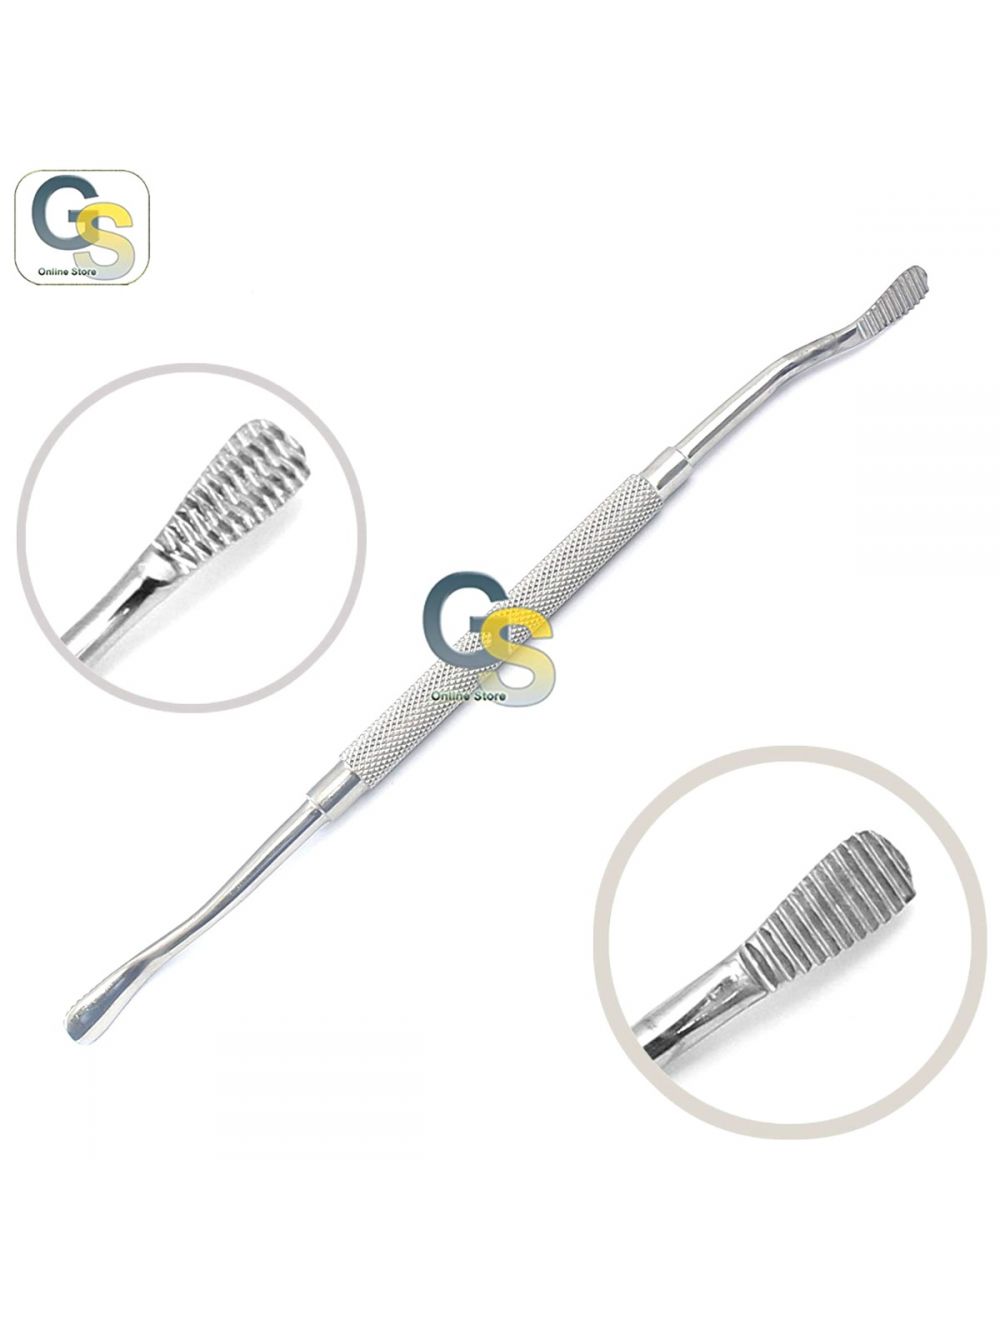 World window Aggregate Outflow Bone File #12 Surgical Dental Dentist | GS0356